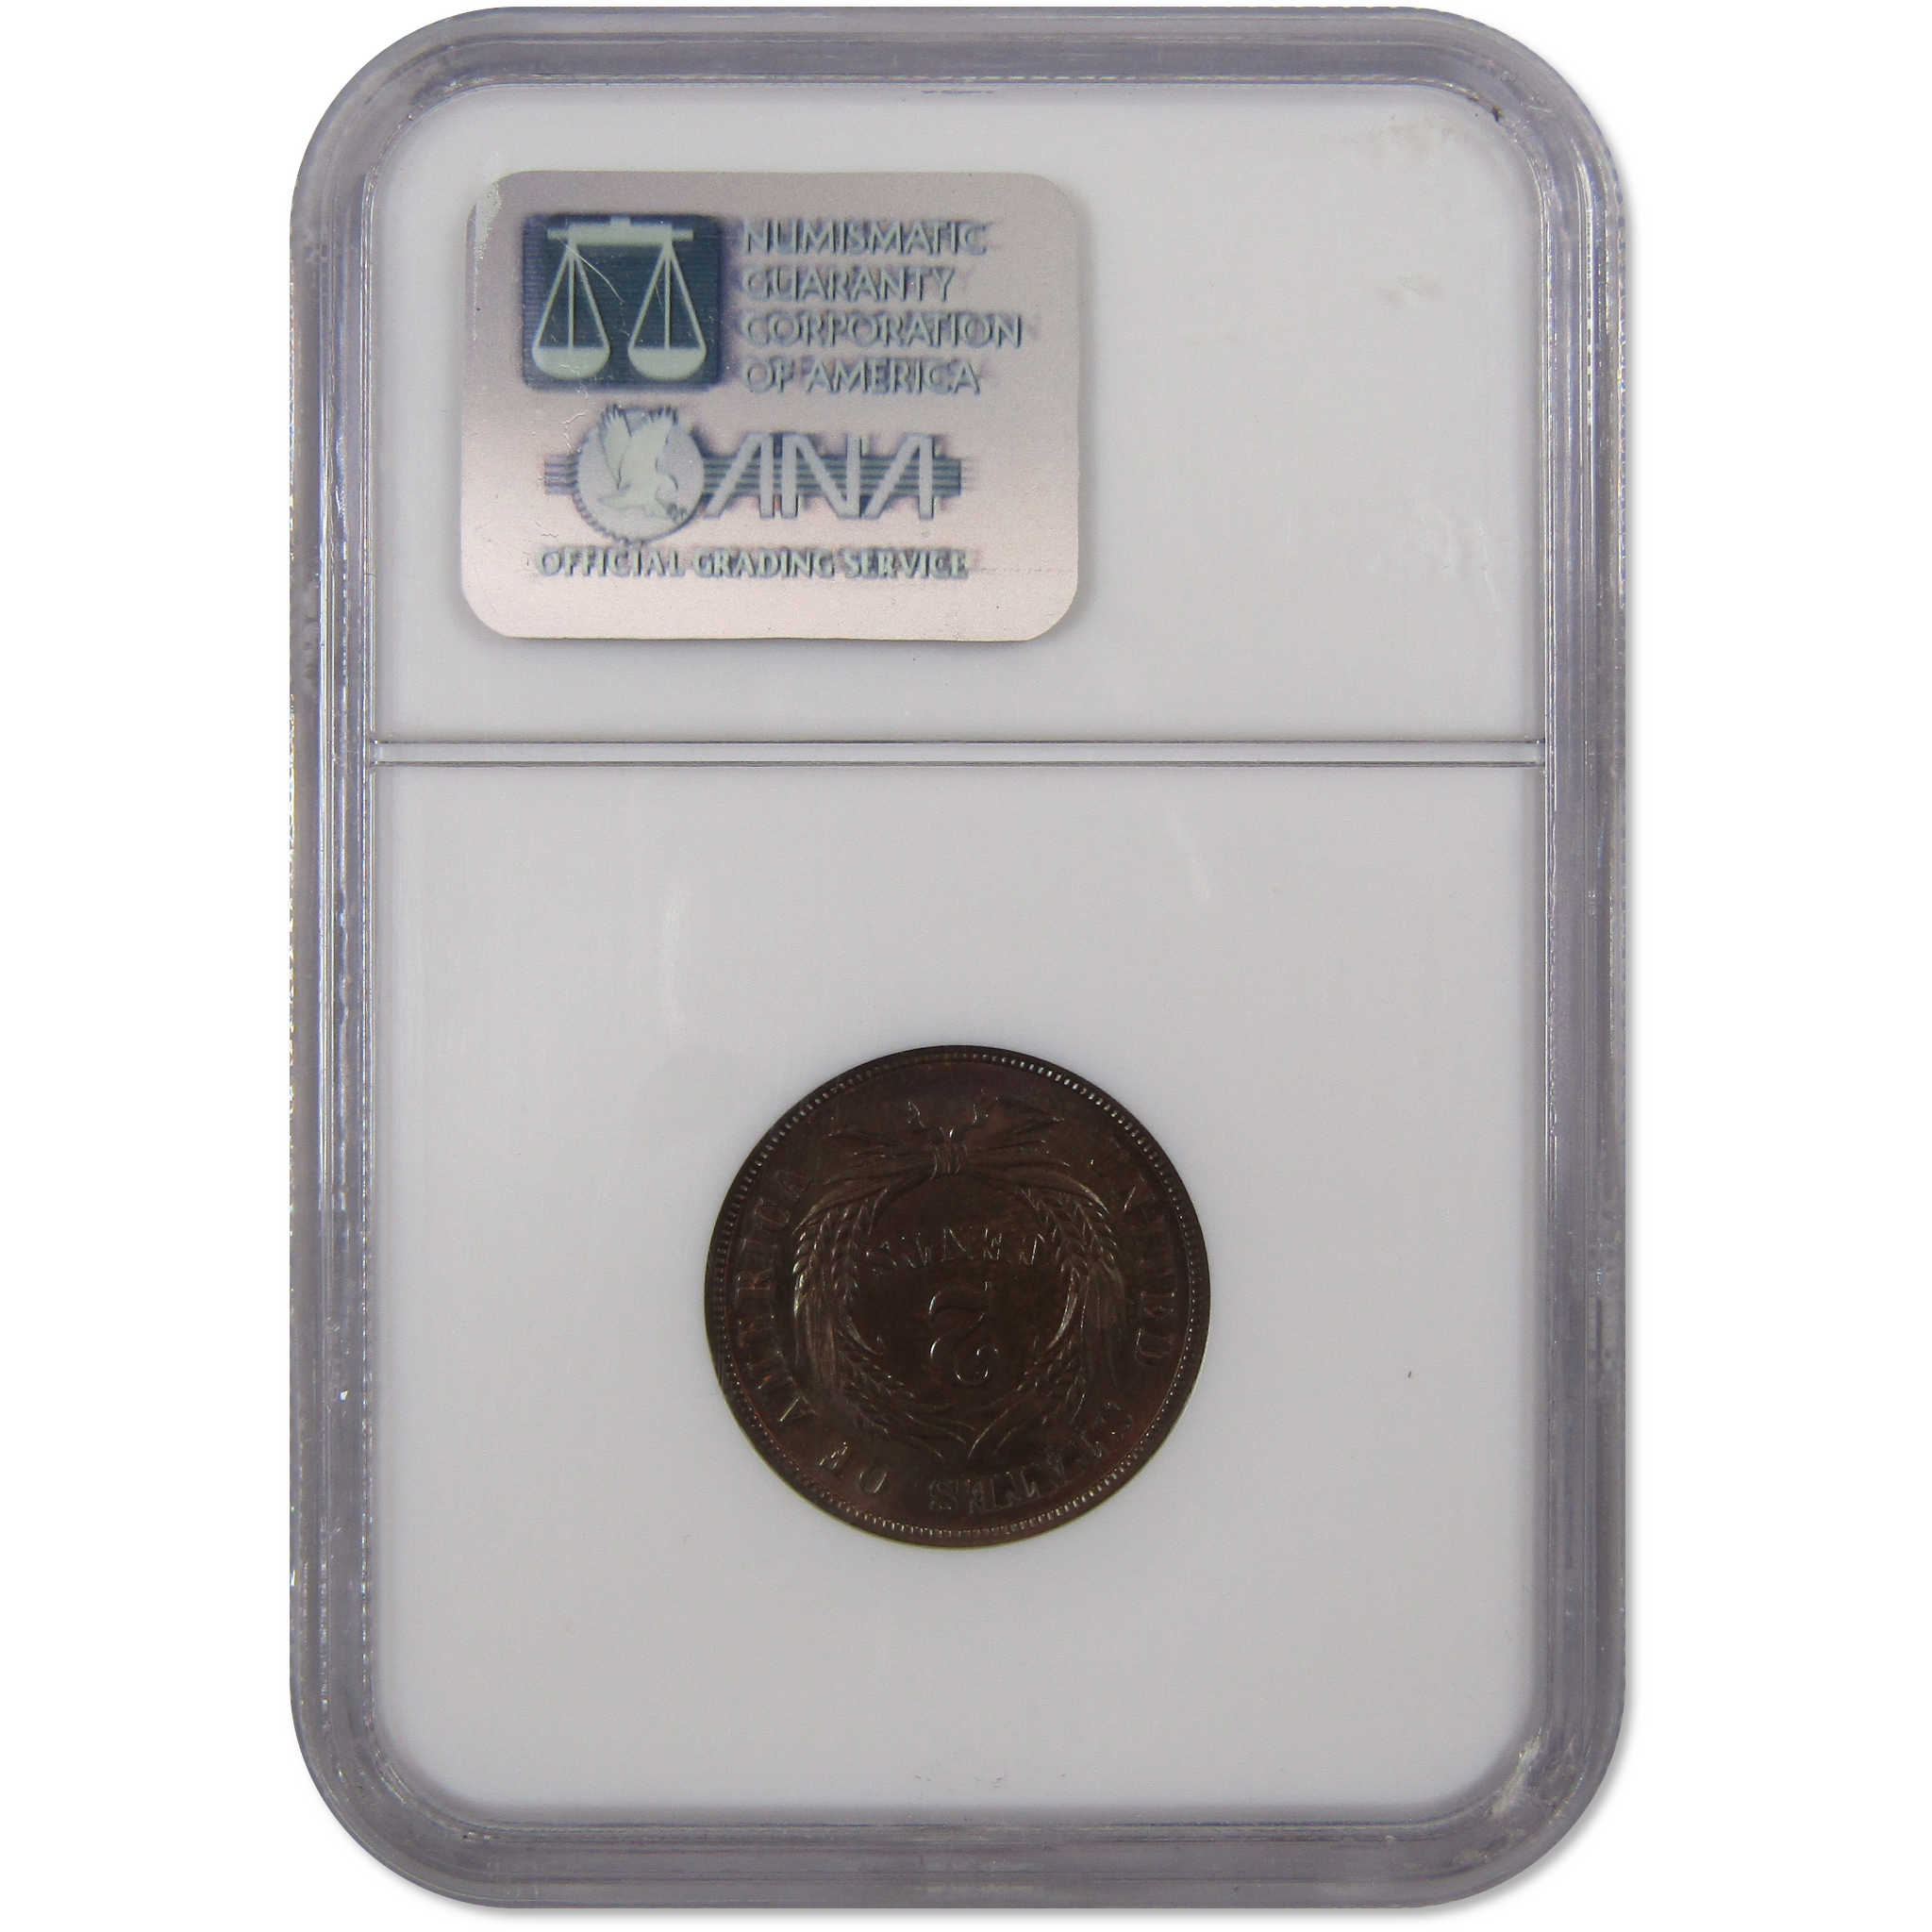 1868 Two Cent Piece MS 64 BN NGC 2c Uncirculated Coin SKU:I9745